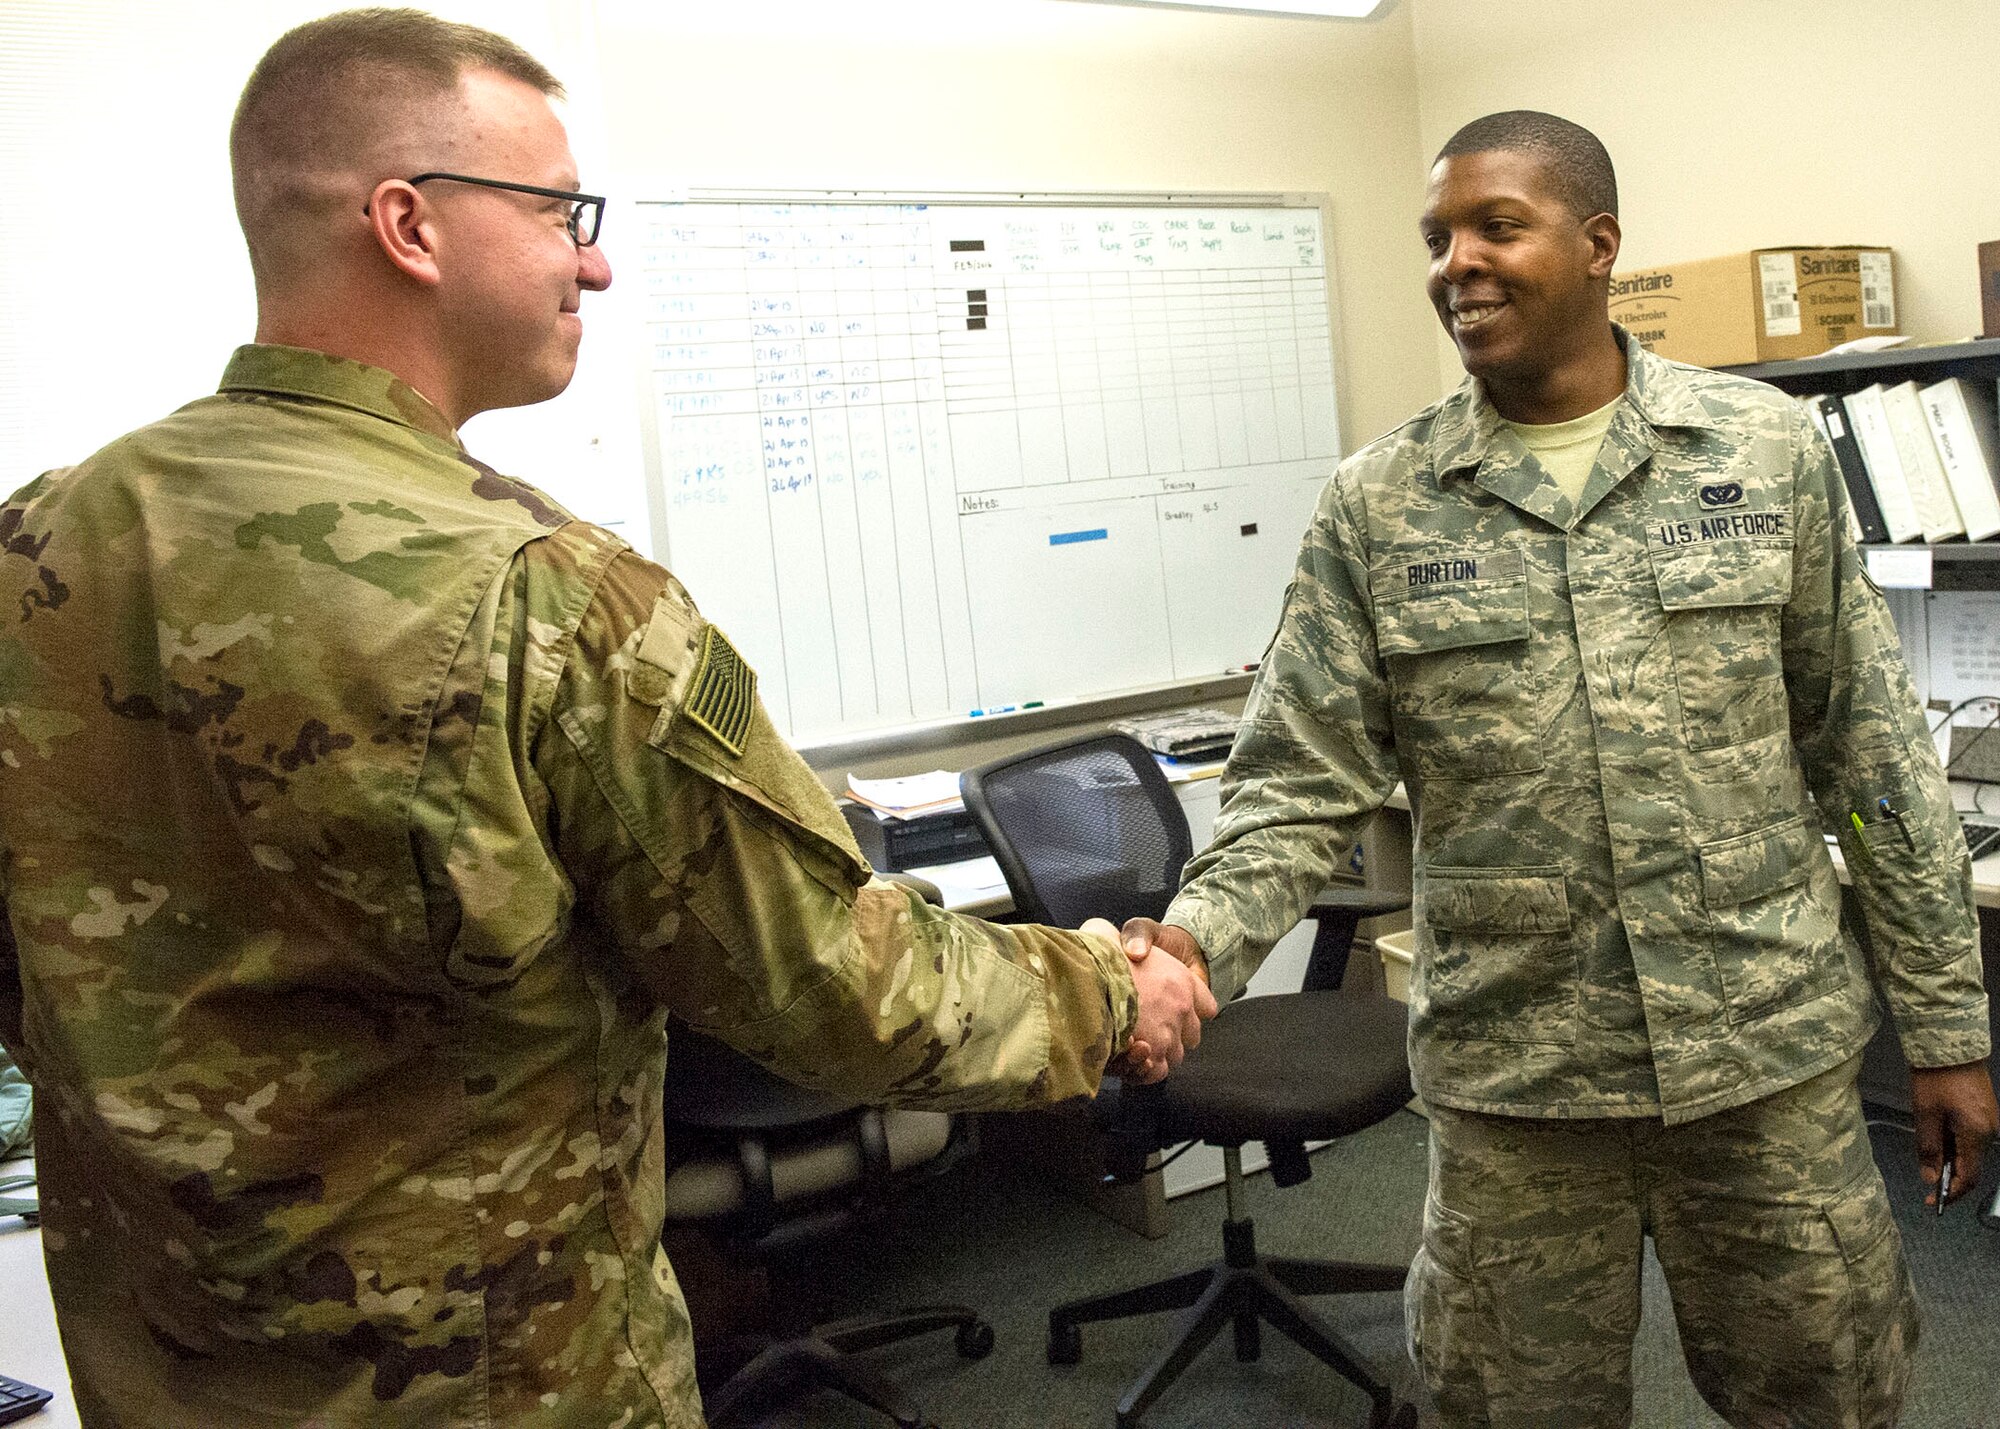 Staff Sgt. James Burton, a 434th Civil Engineer Squadron Water and Fuel Systems technician, welcomes an Airman to his office for a career advising appointment at Grissom Air Reserve Base, Ind., June 2, 2019. Burton considered leaving the Air Force but later became a career advisor to help others in their careers. 
(U.S. Air Force photo by Staff Sgt. Courtney Dotson-Essett)